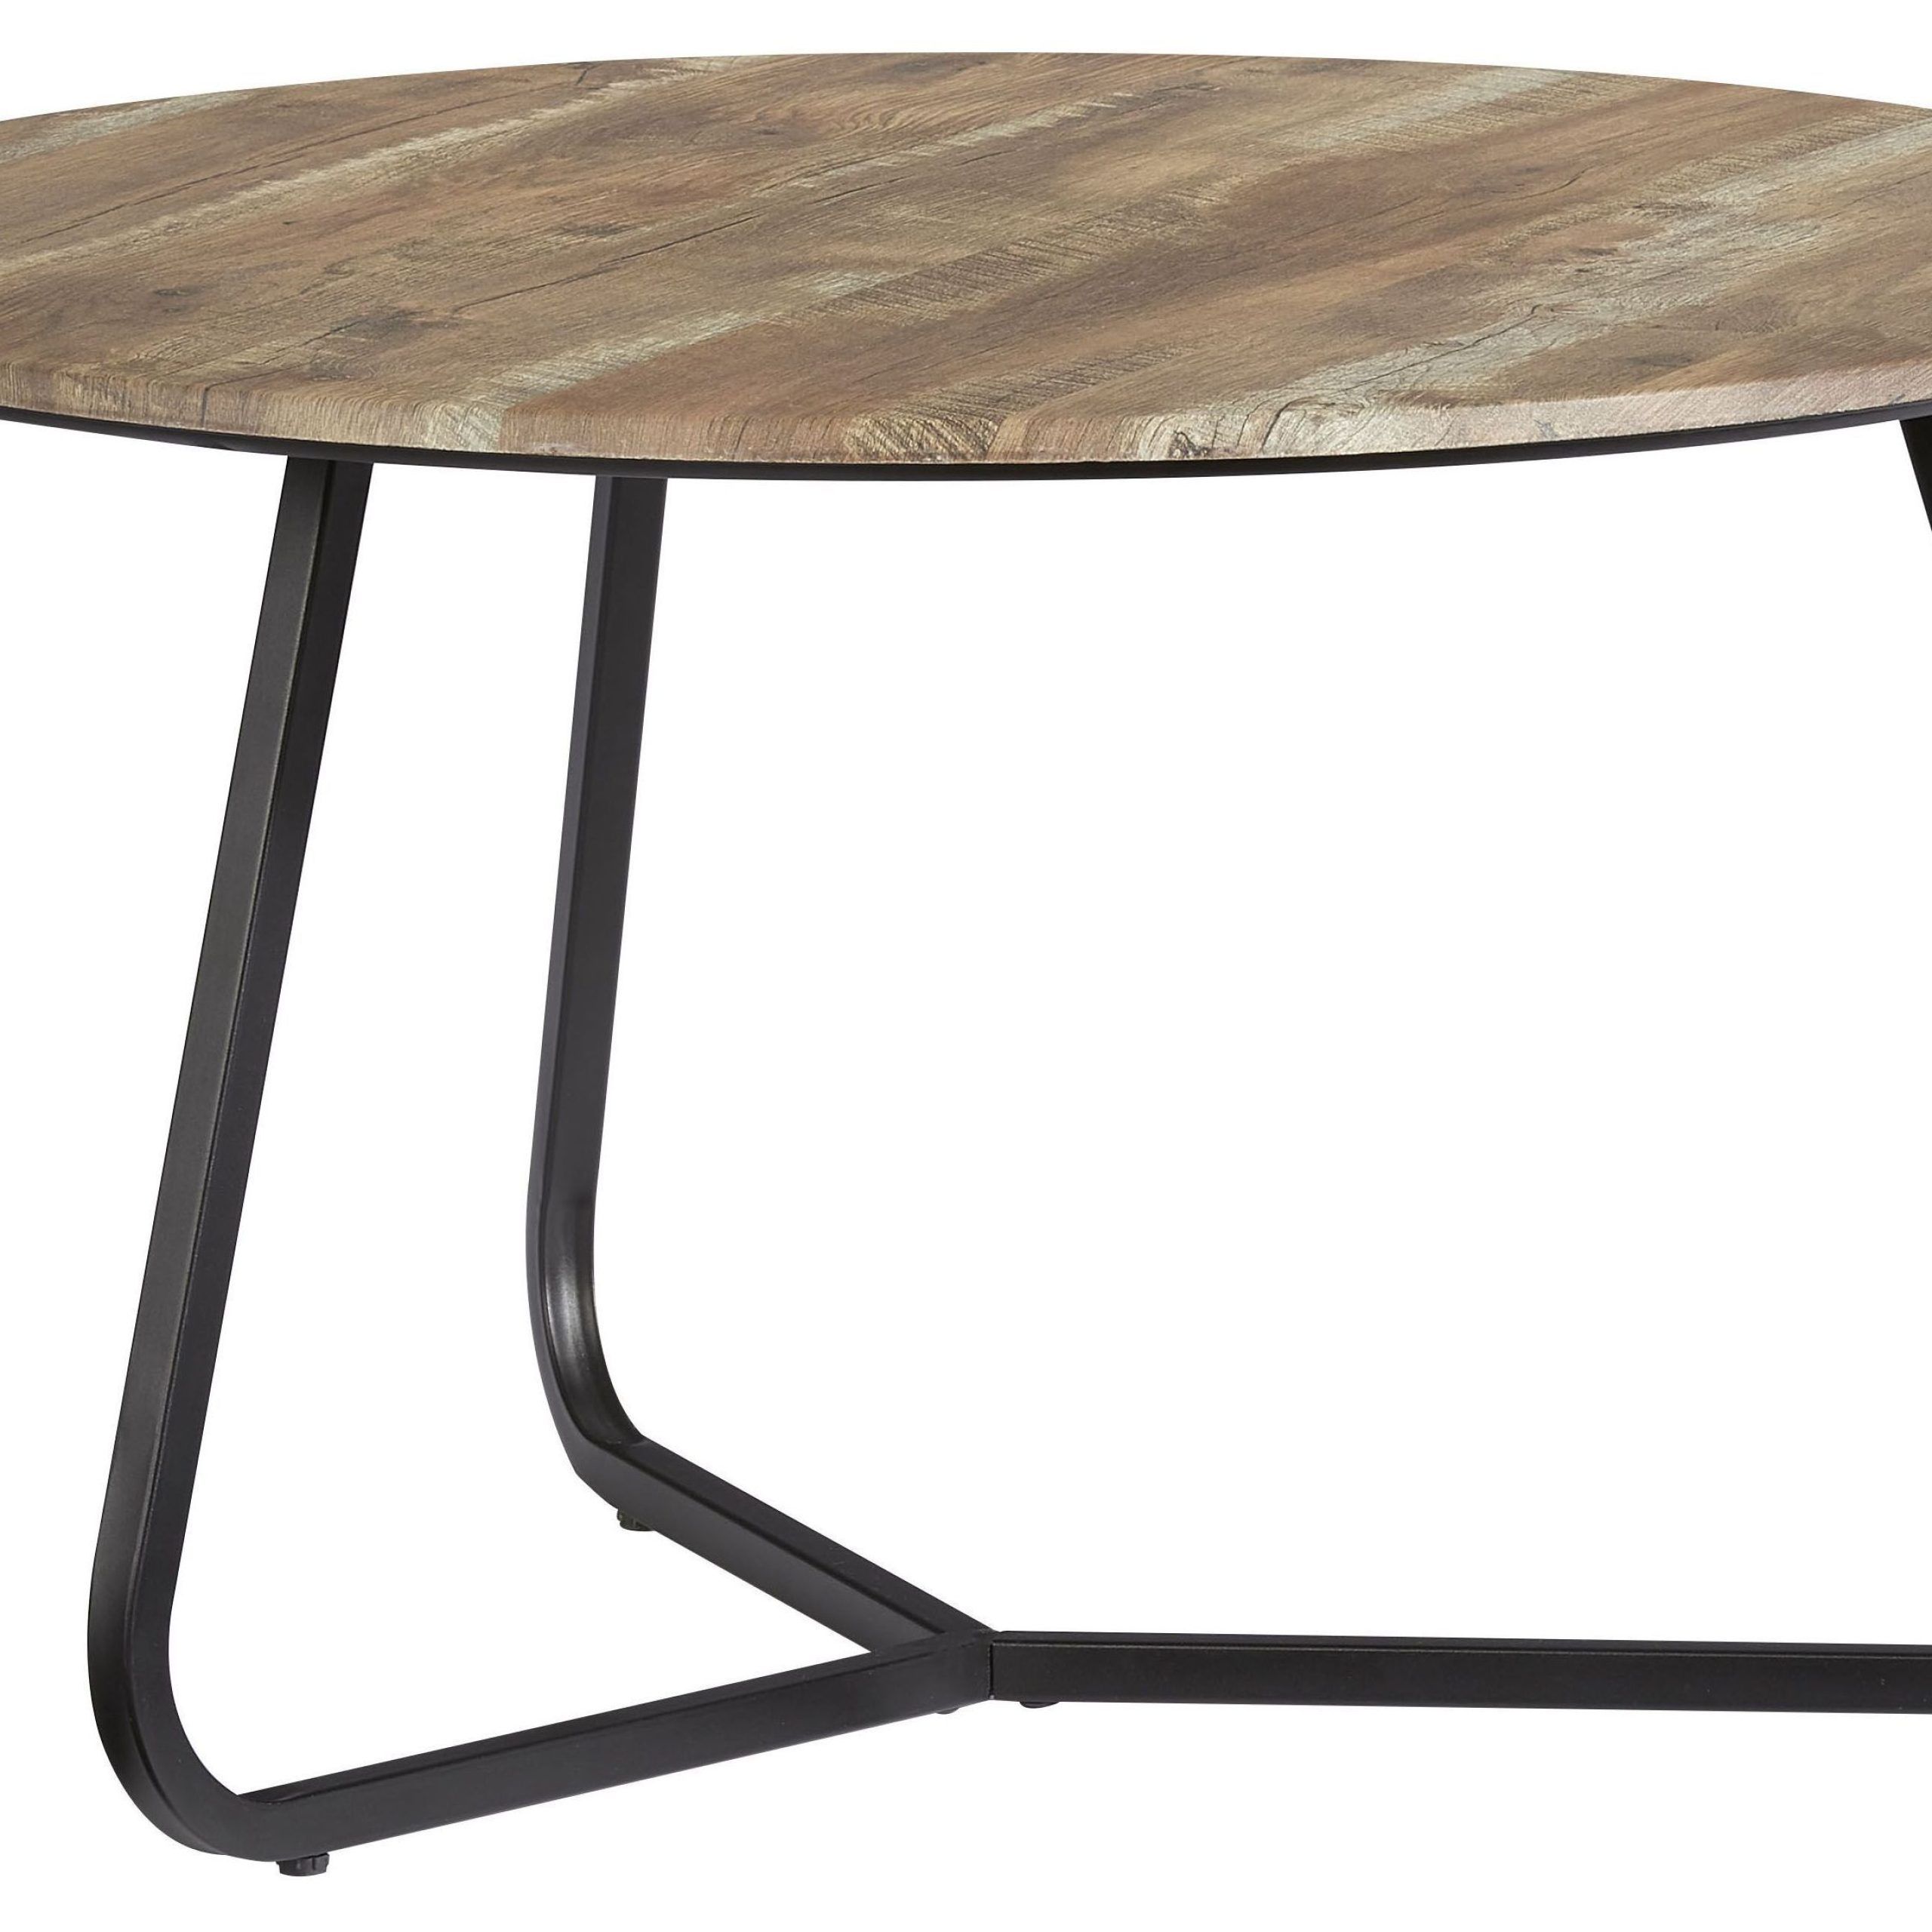 Finley Yukon And Black Metal Cocktail Table From Progressive Furniture |  Coleman Furniture For Progressive Furniture Cocktail Tables (View 12 of 15)